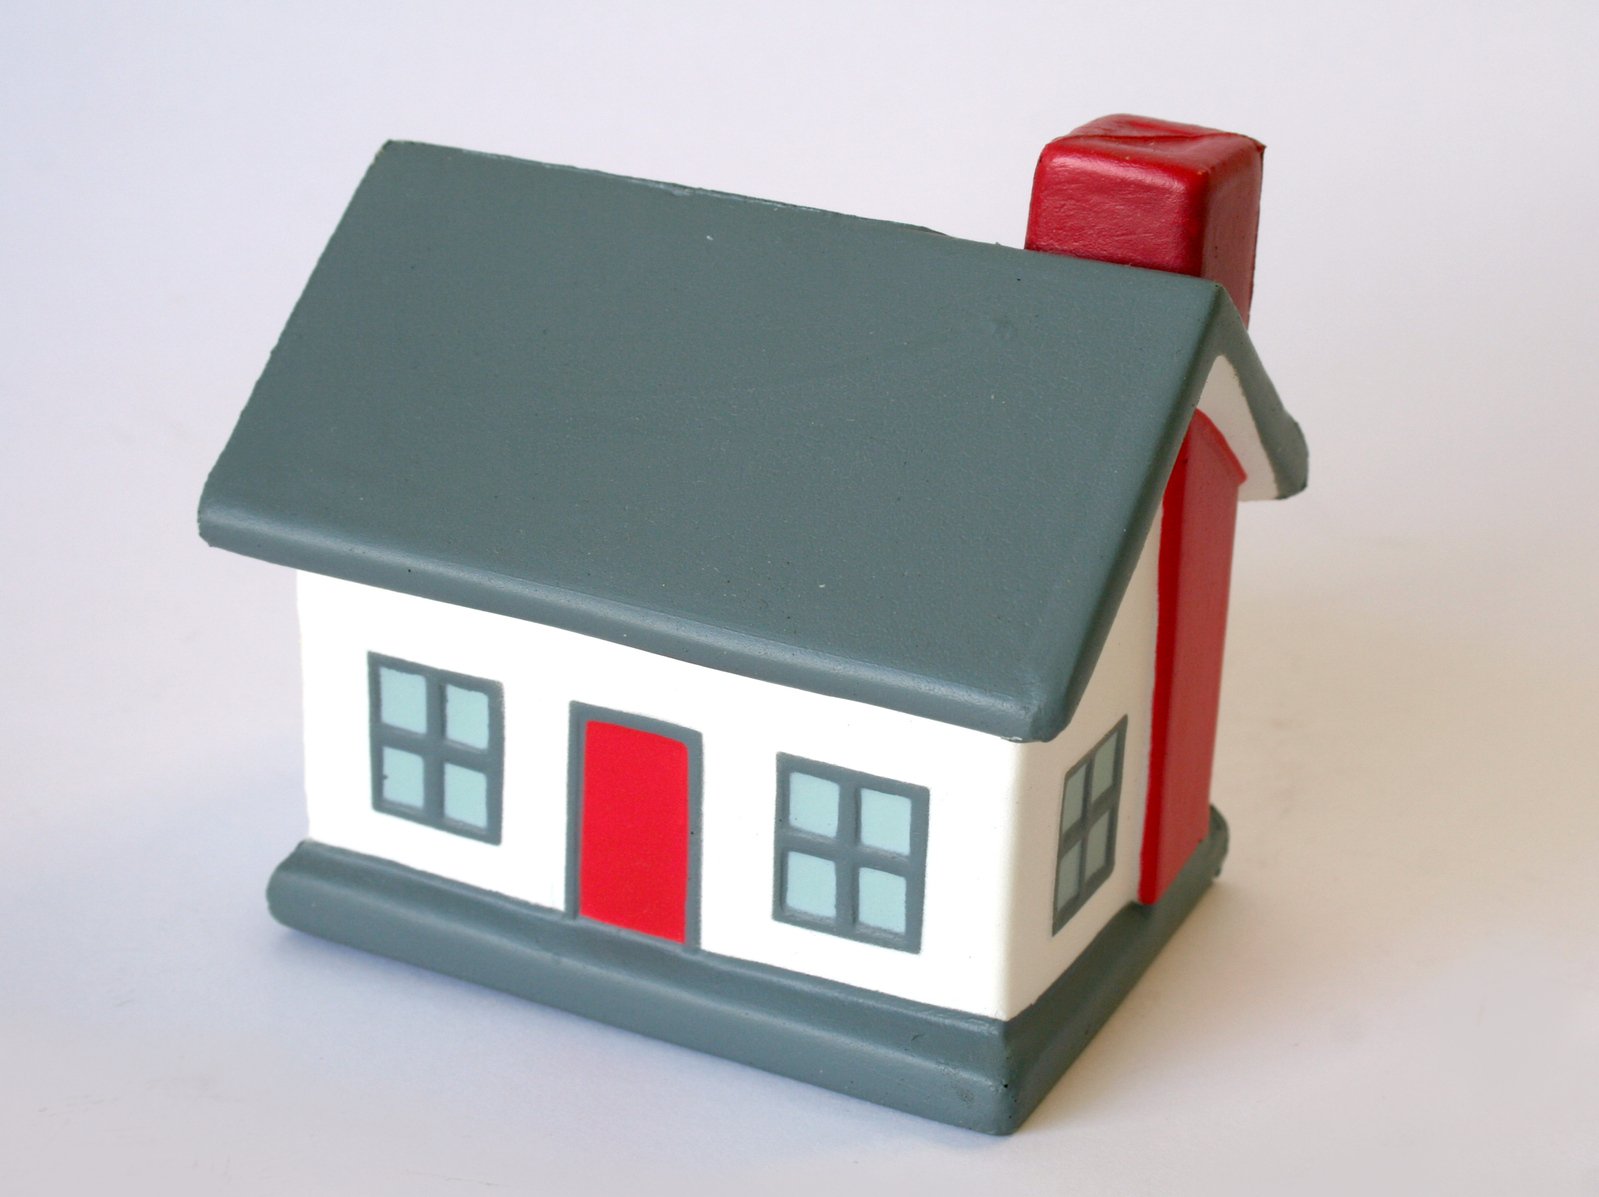 a toy model of a house with a red roof